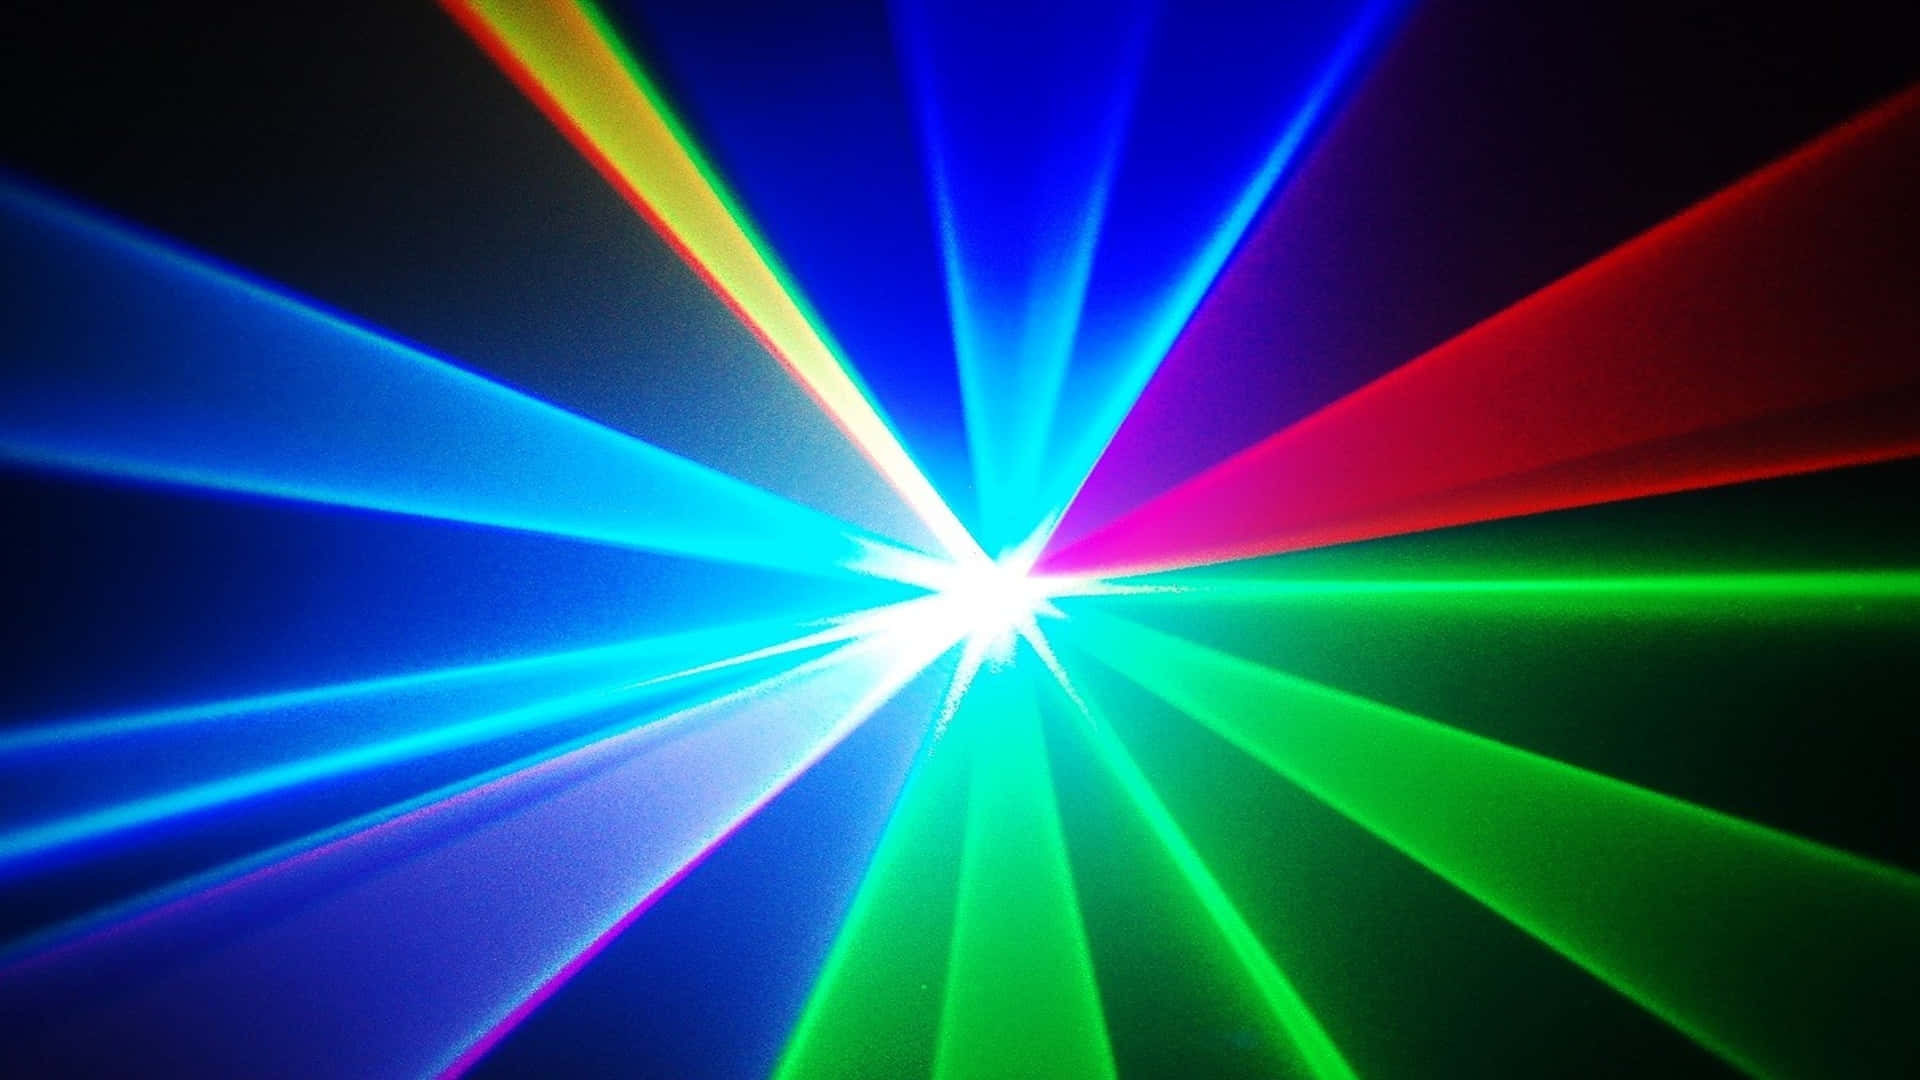 A Colorful Laser Light With A Rainbow Effect